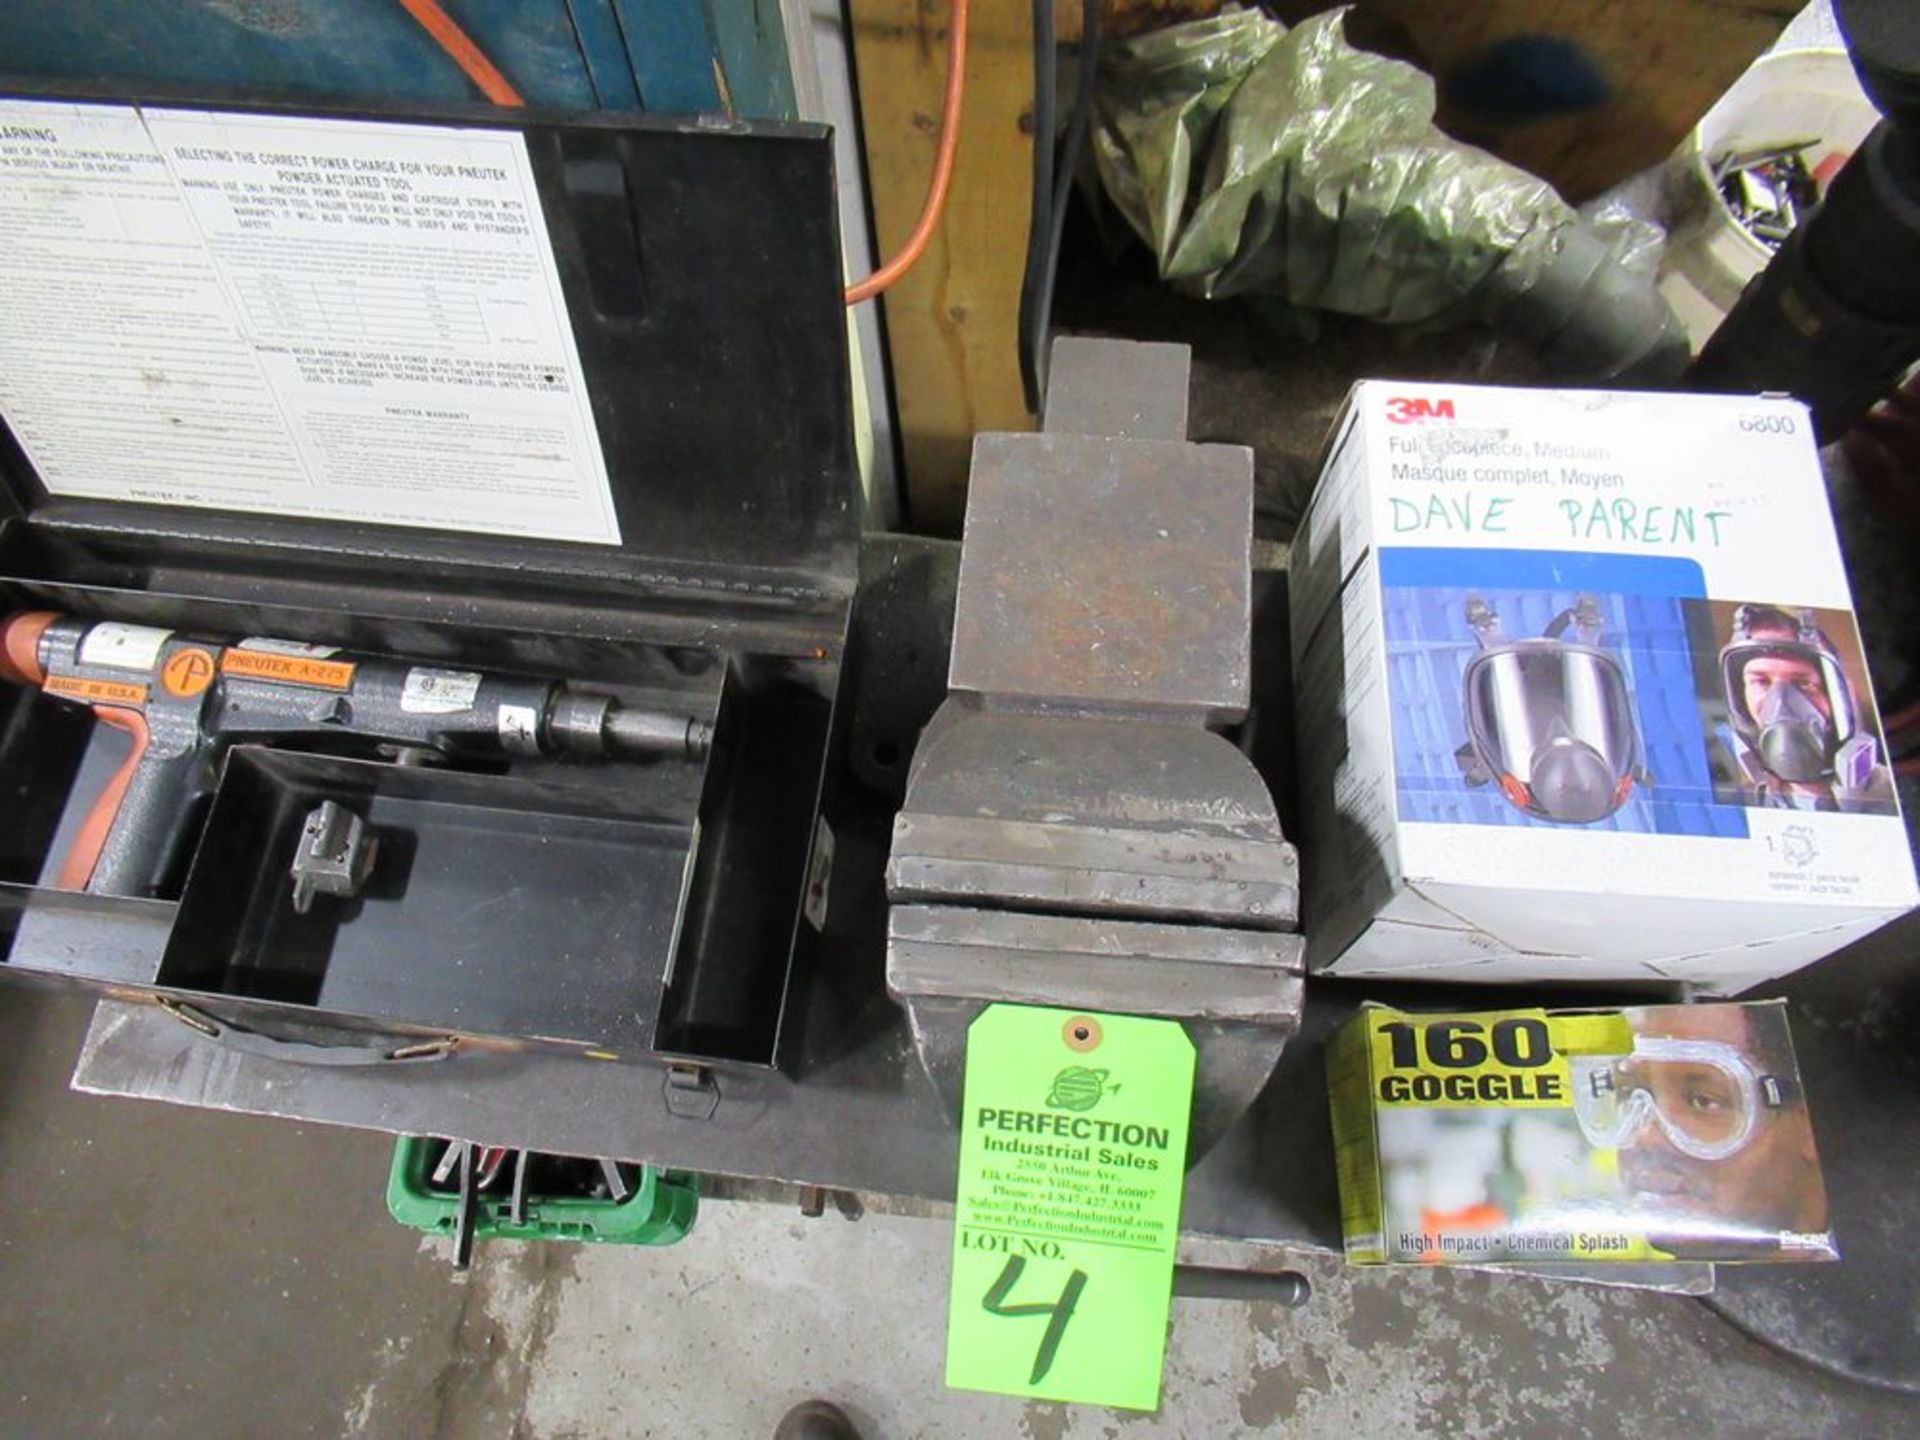 Lot Comprising 6" Bench Vise, PNEUTEK Powder Actuated Tool, Full Face Mask, Goggles w/ Table & Misc. - Image 2 of 2